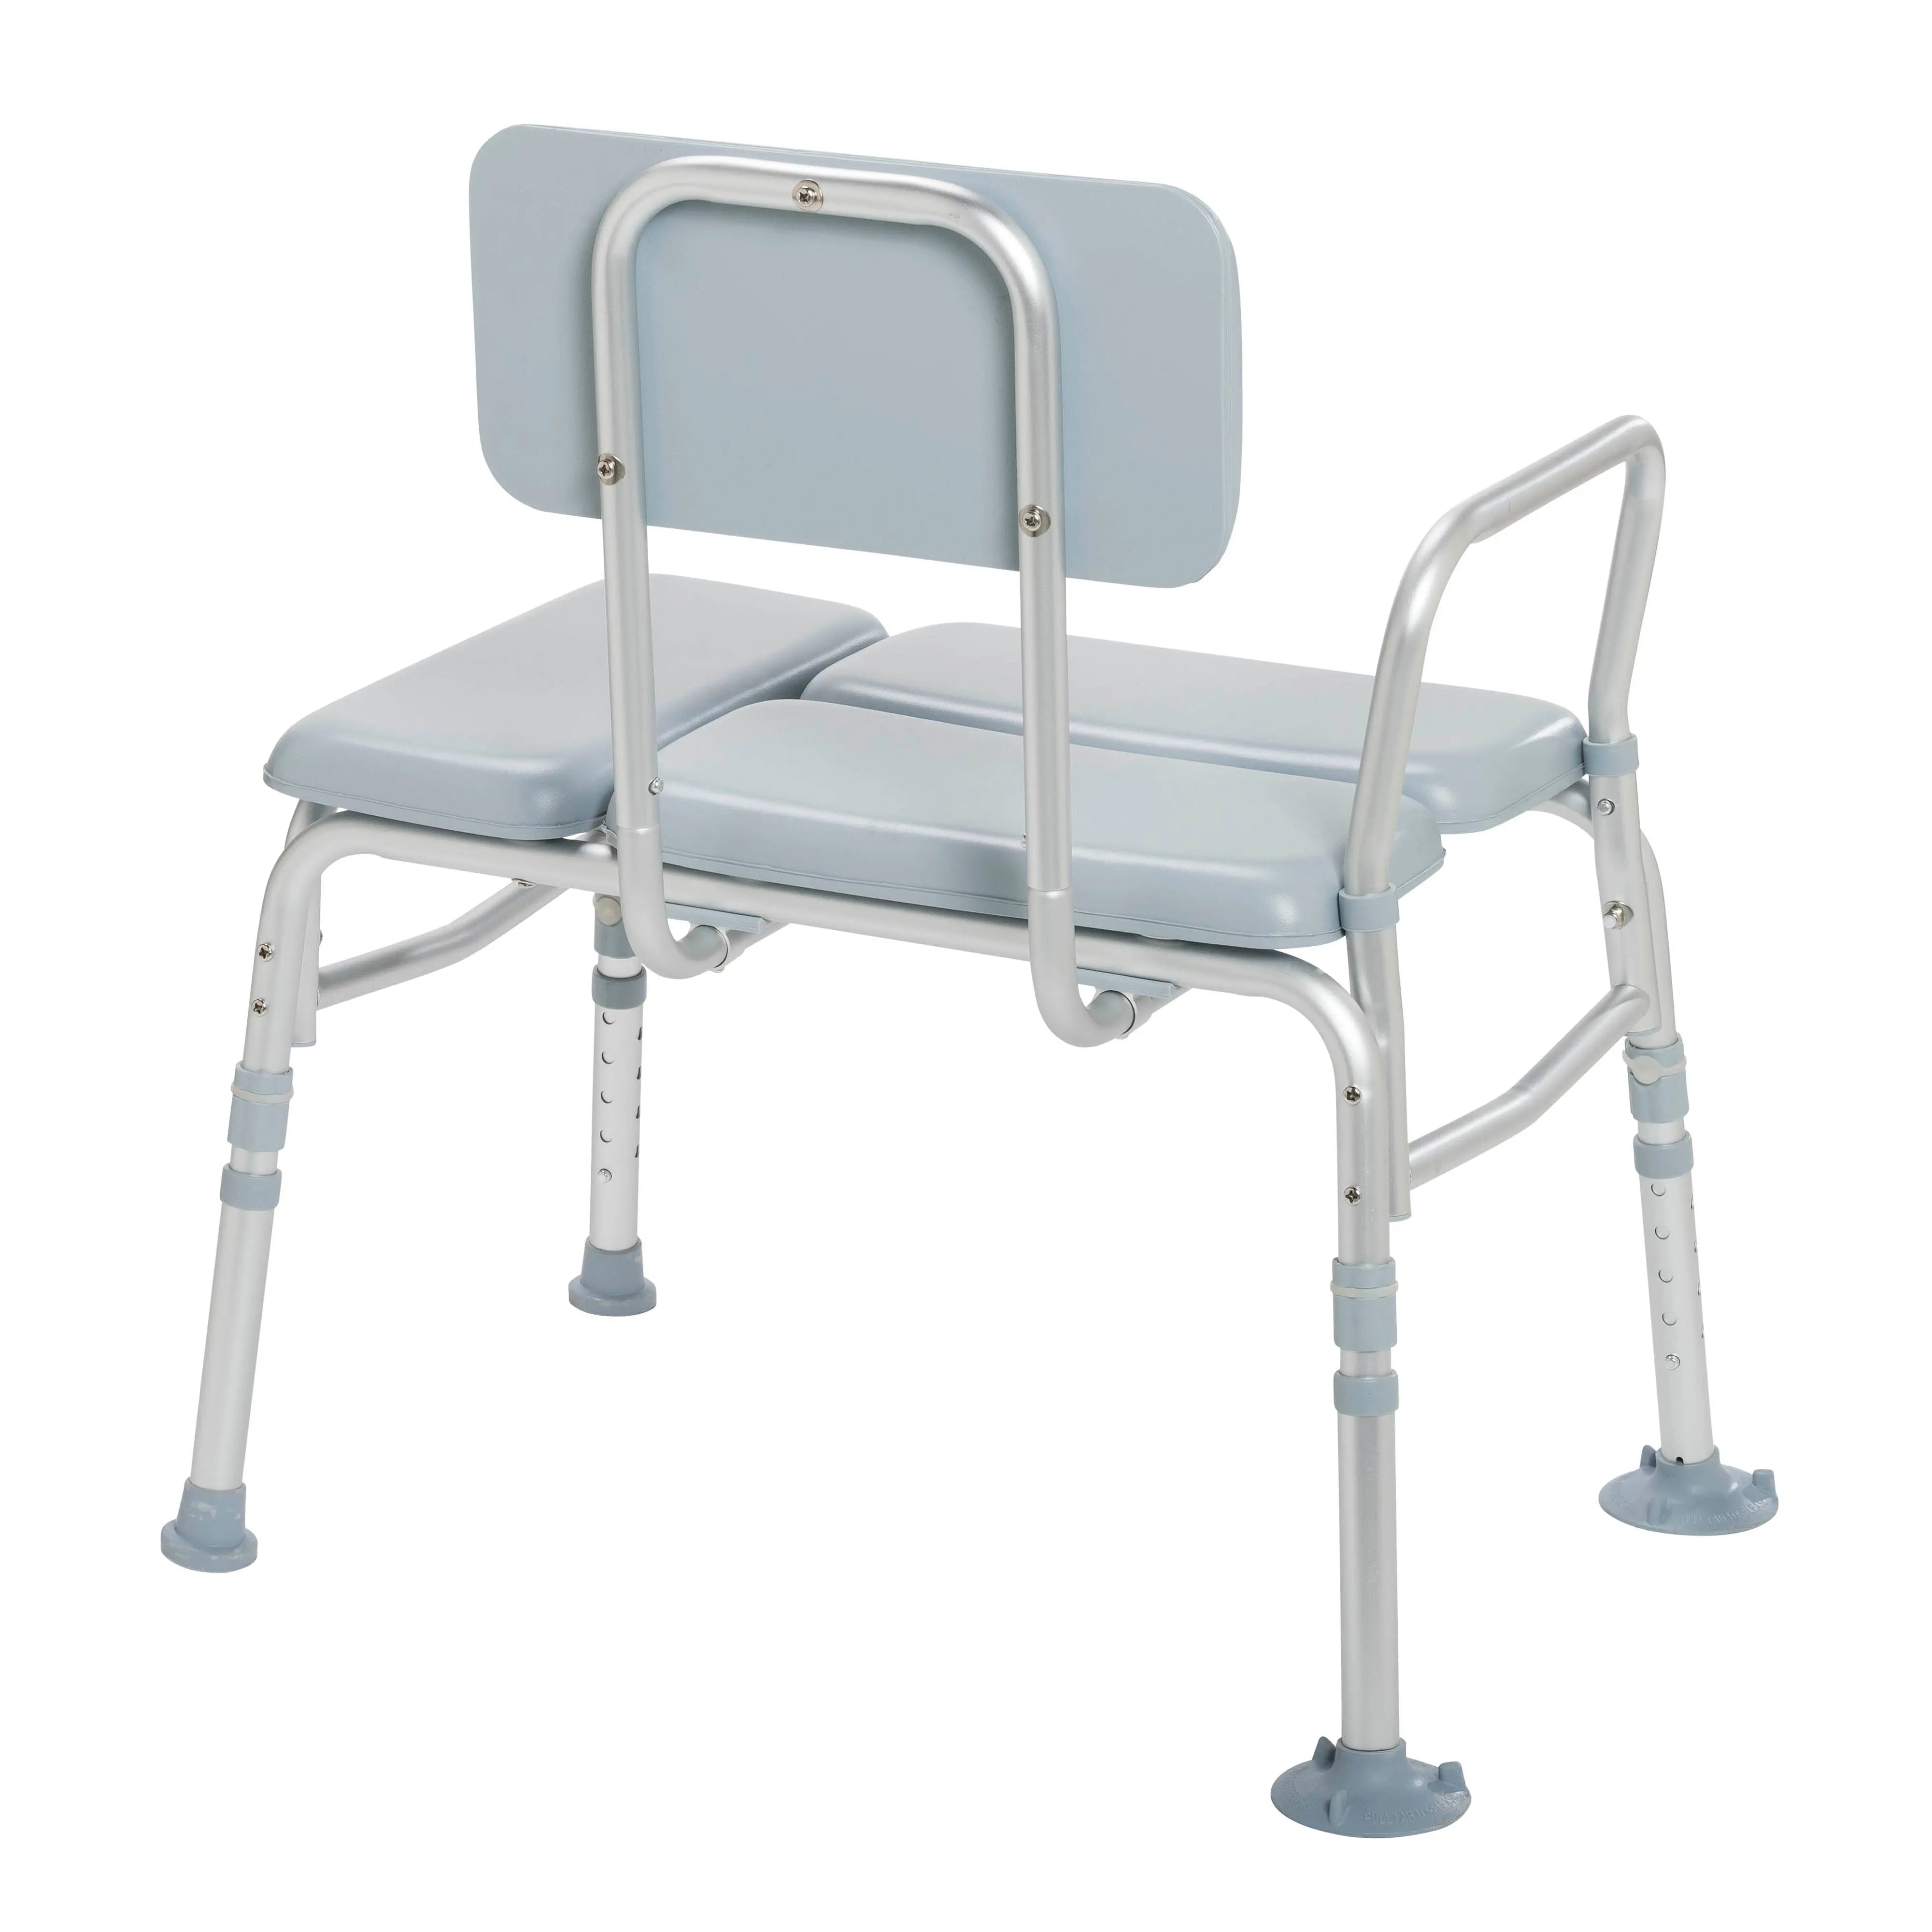 Padded Seat Transfer Bench - Home Health Store Inc